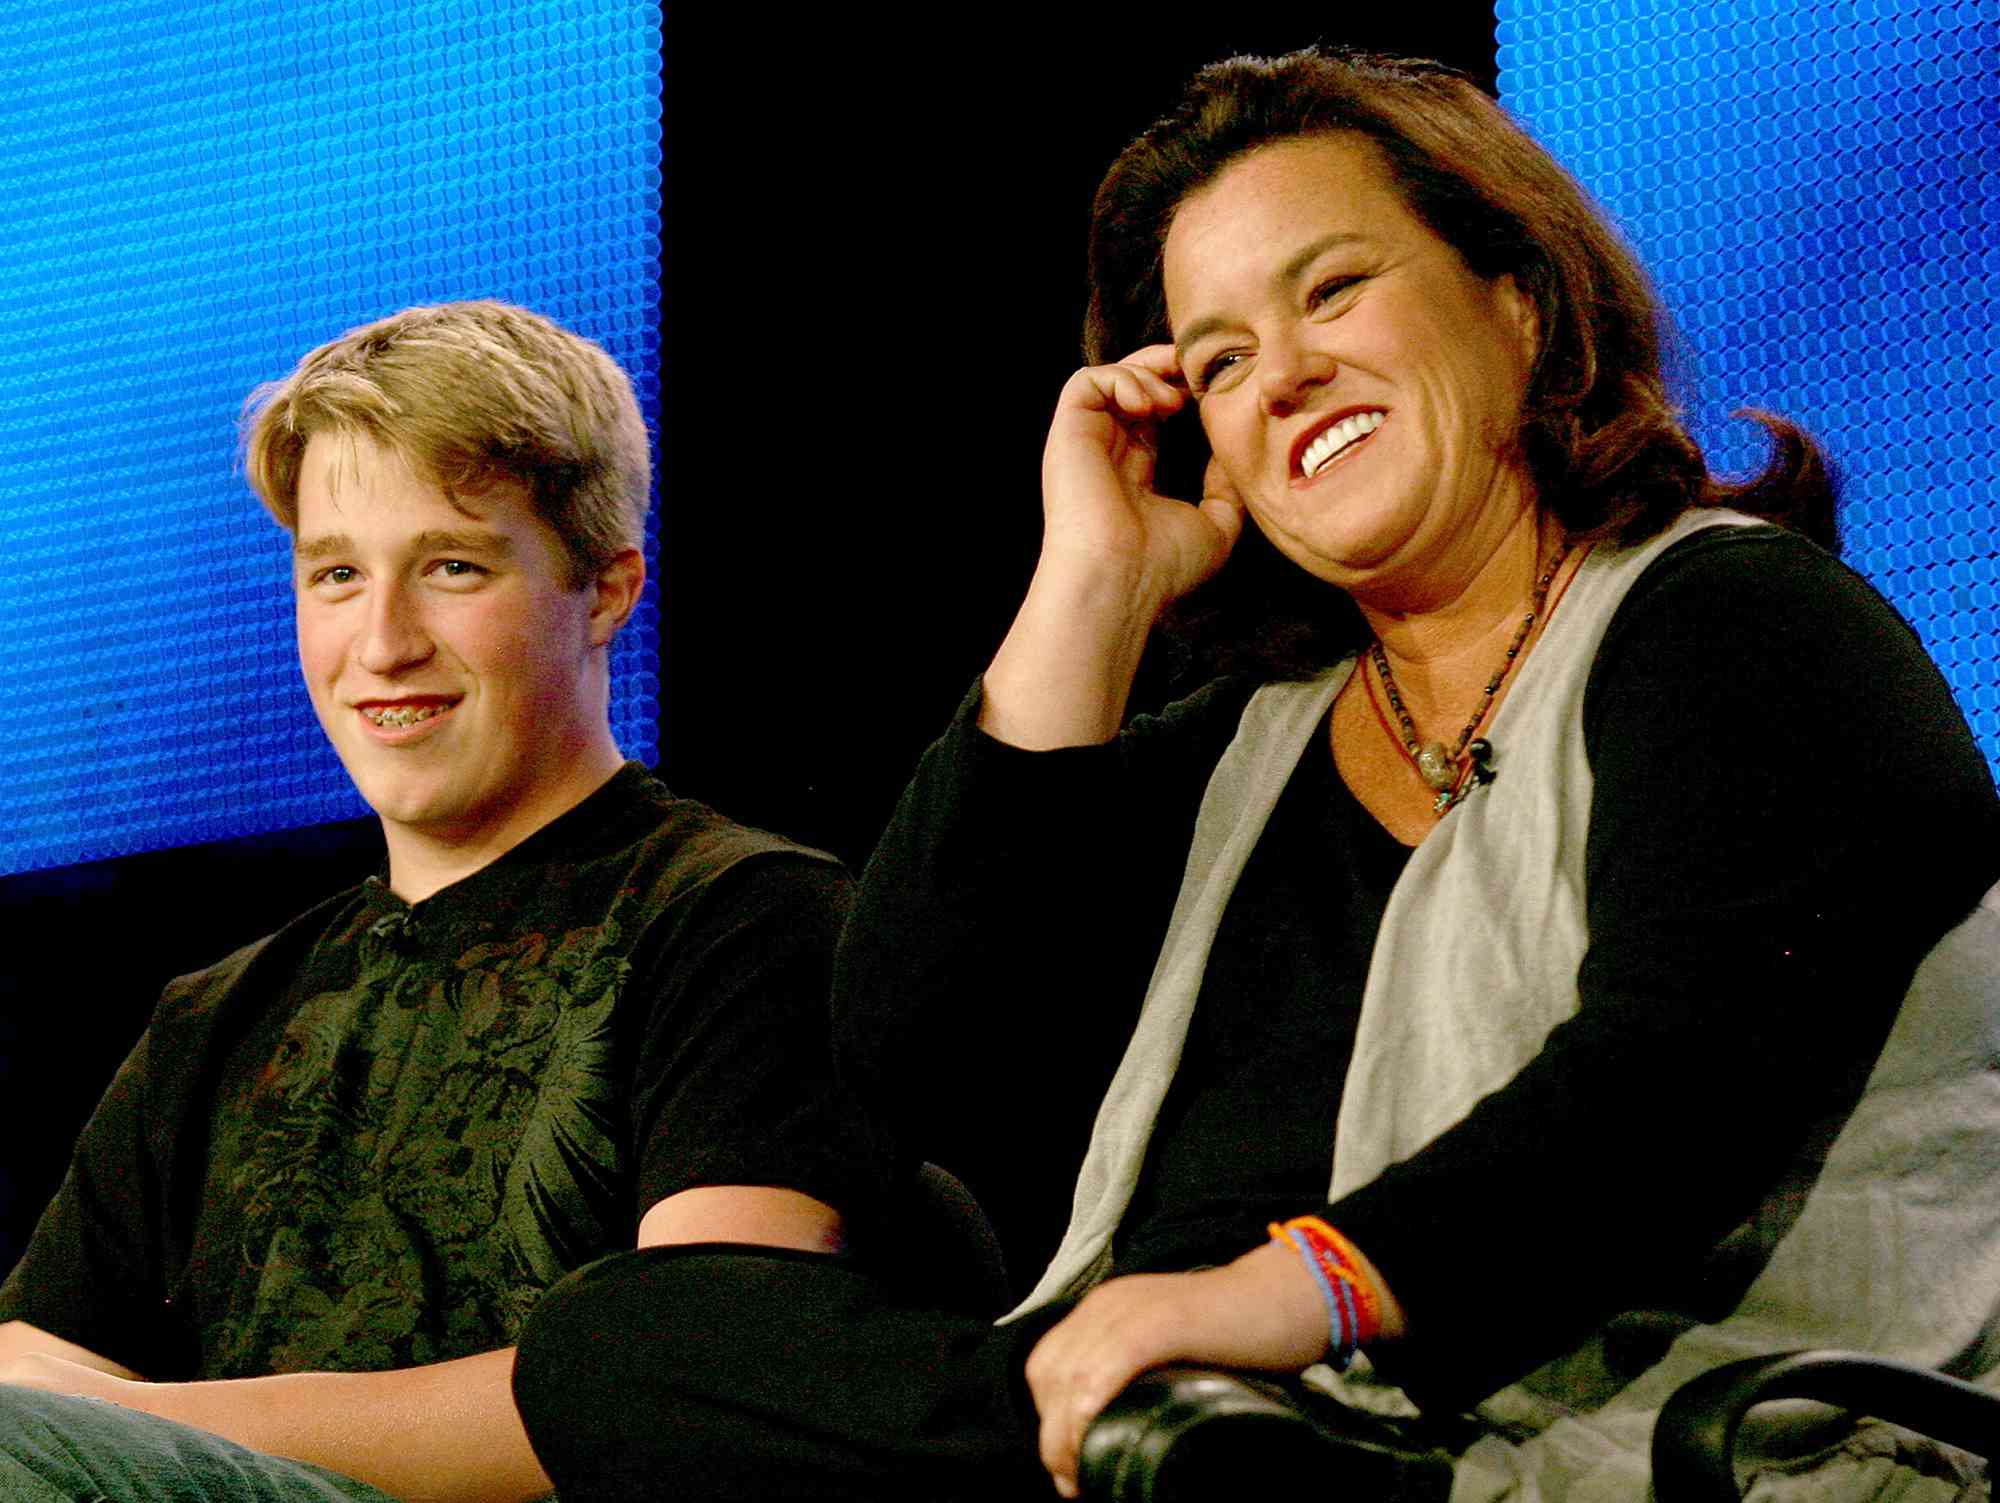 Parker O'Donnell (L) and actress Rosie O'Donnell of "A Family Is A Family" speak during the HBO portion of the 2010 Television Critics Association Press Tour at the Langham Hotel on January 14, 2010 in Pasadena, California